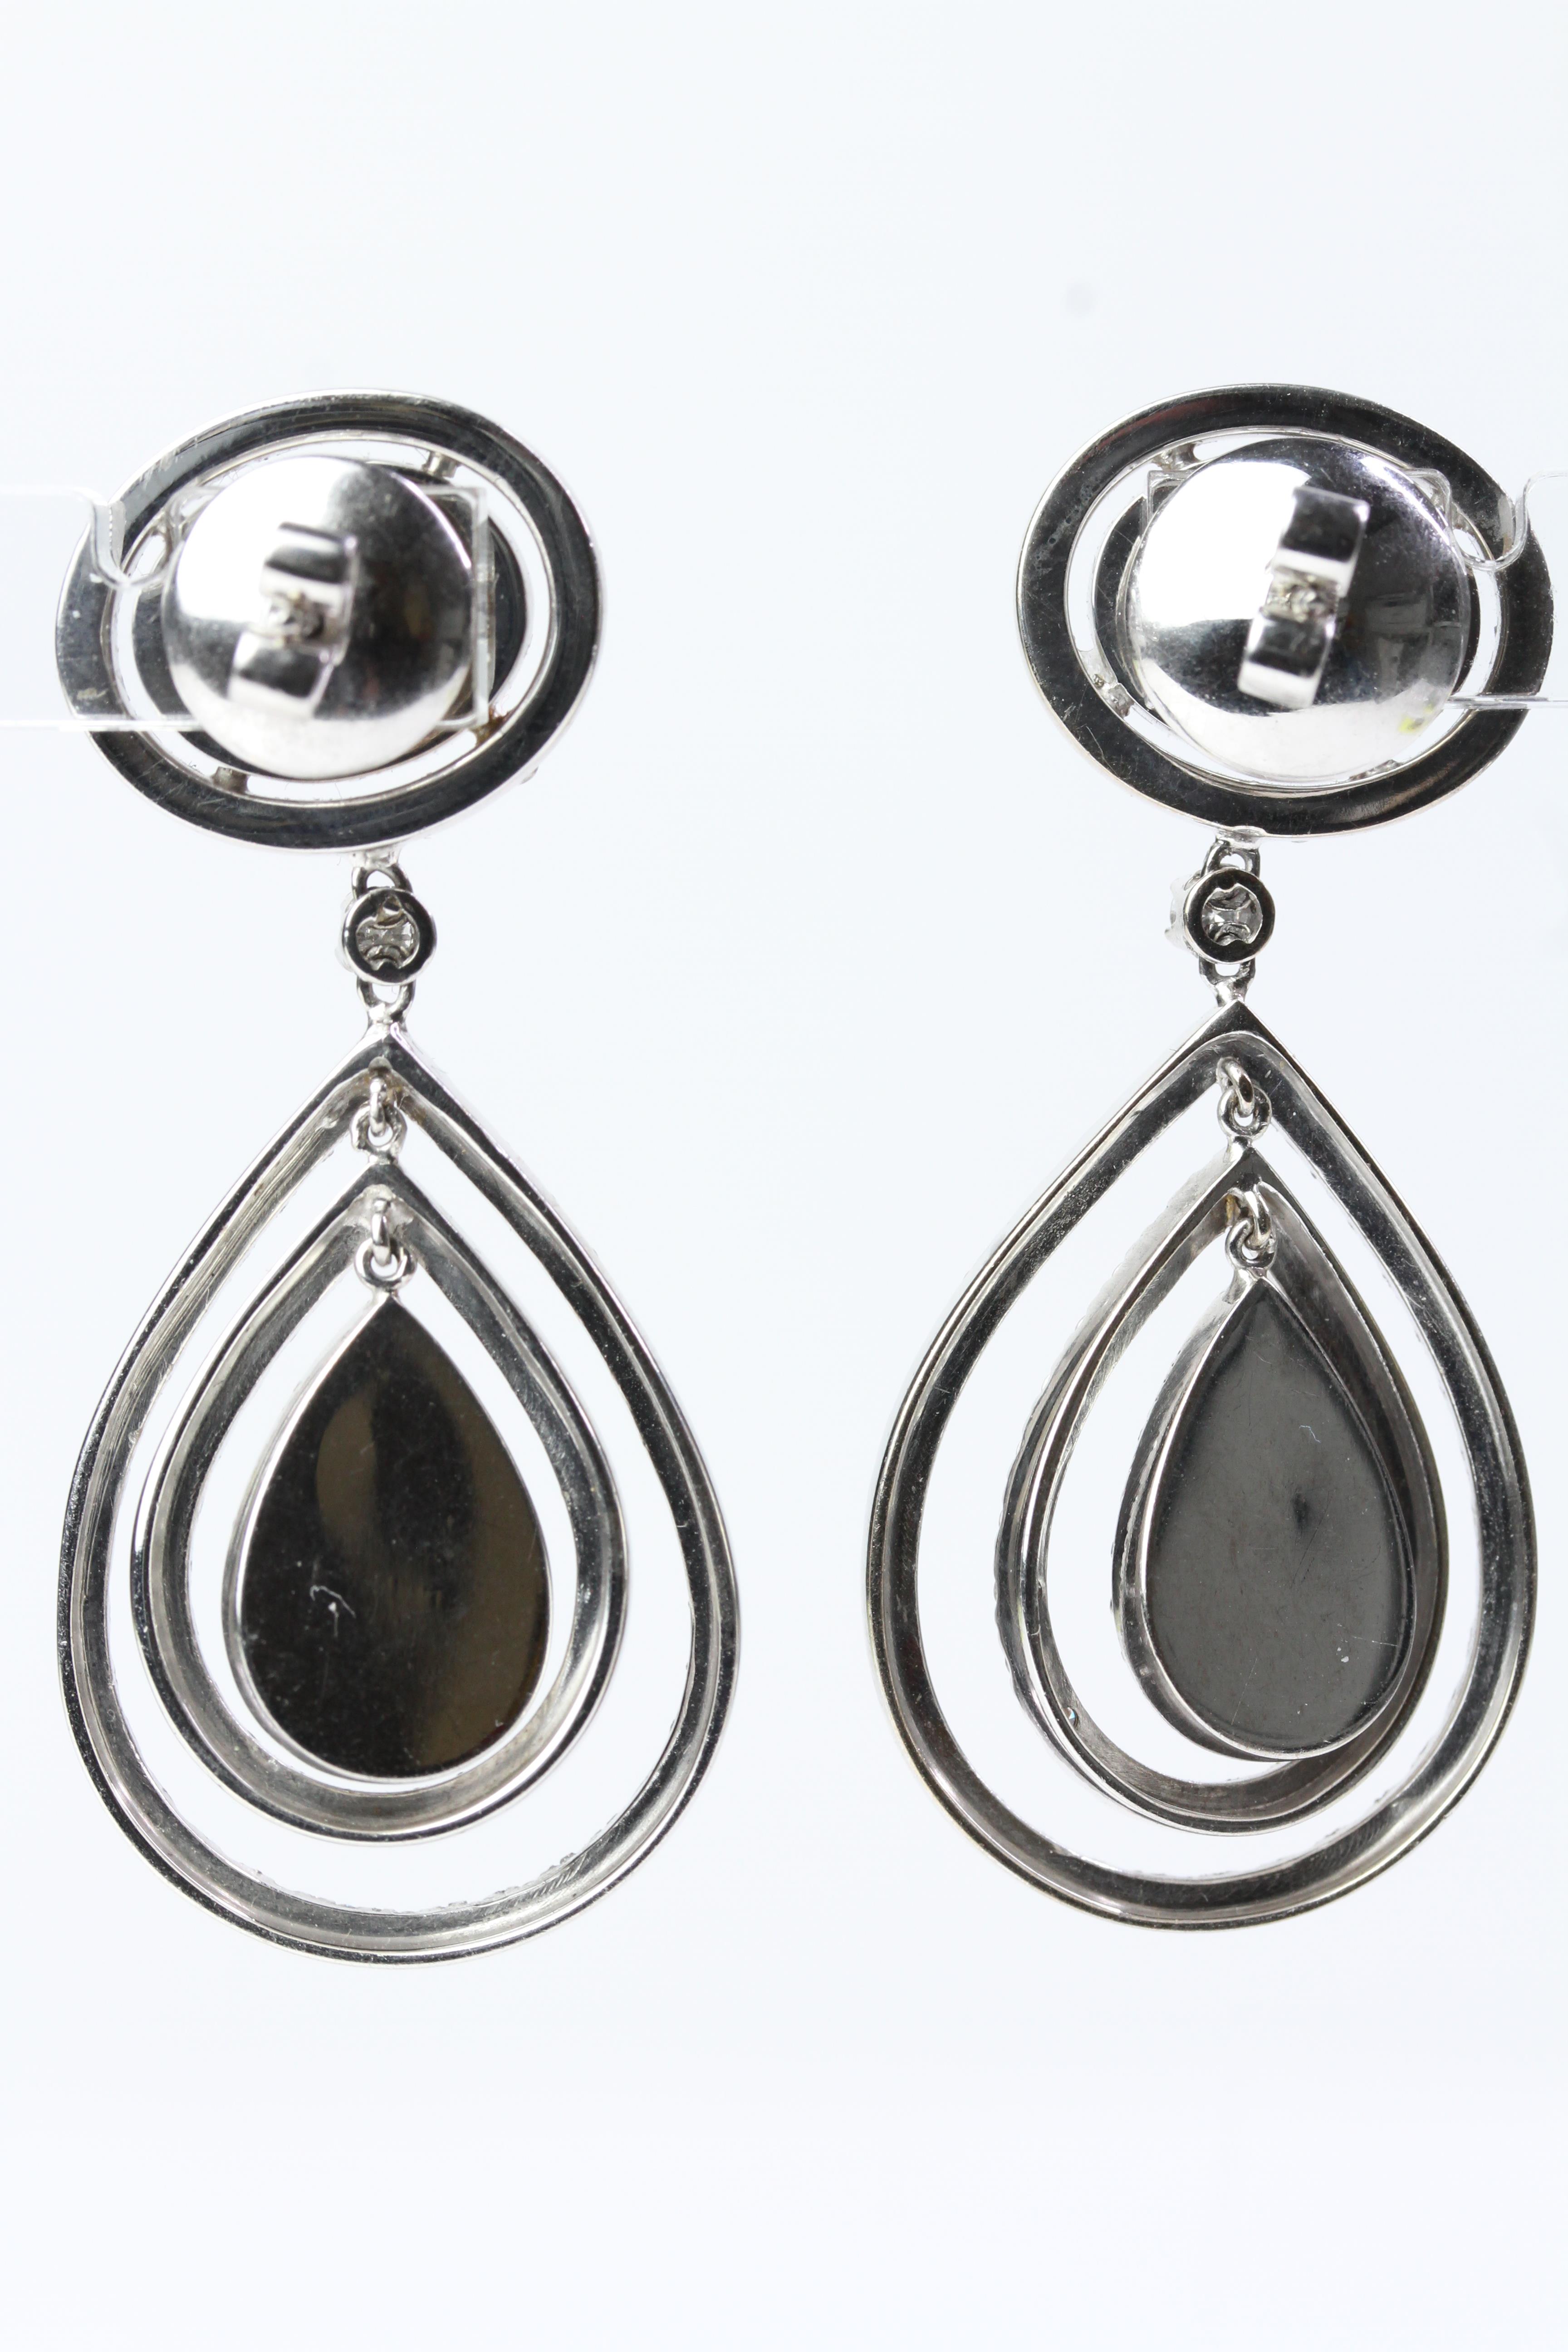 18WG Large pave set pear shaped domes with double moveable halos suspended from an oval pave set - Image 2 of 2